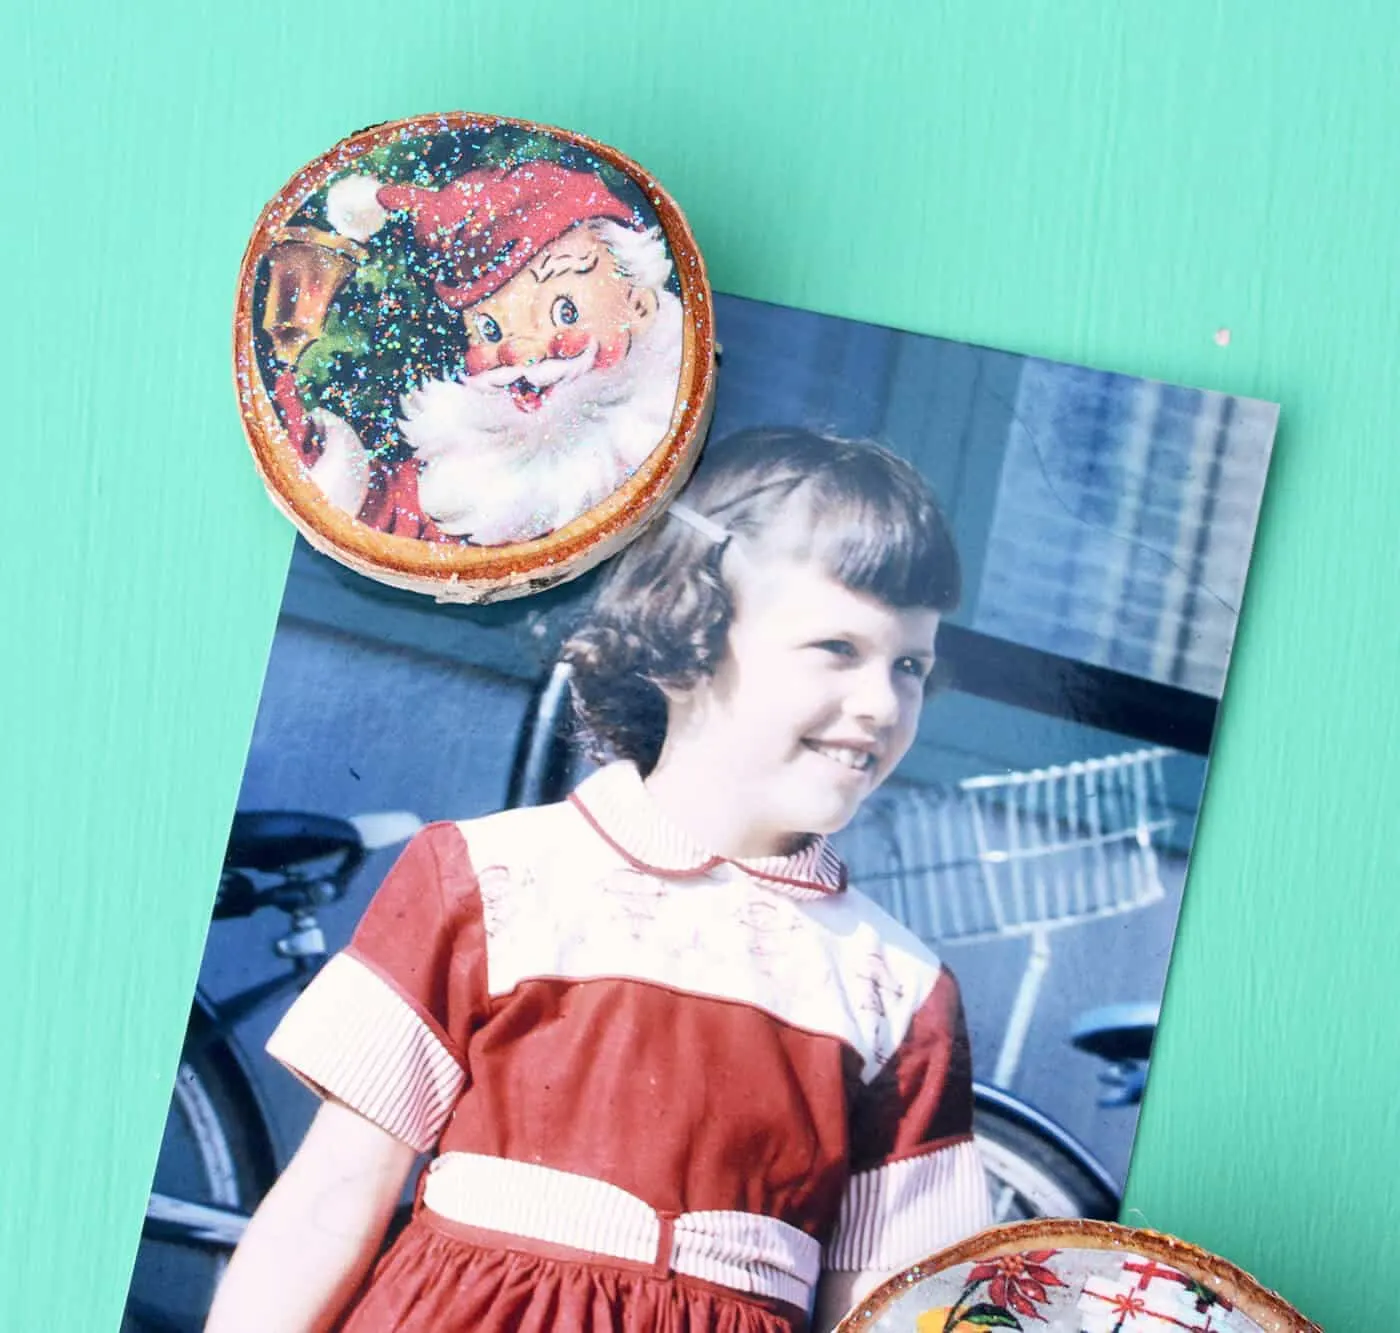 Learn how to make sparkly Christmas magnets with Mod Podge on wood slices